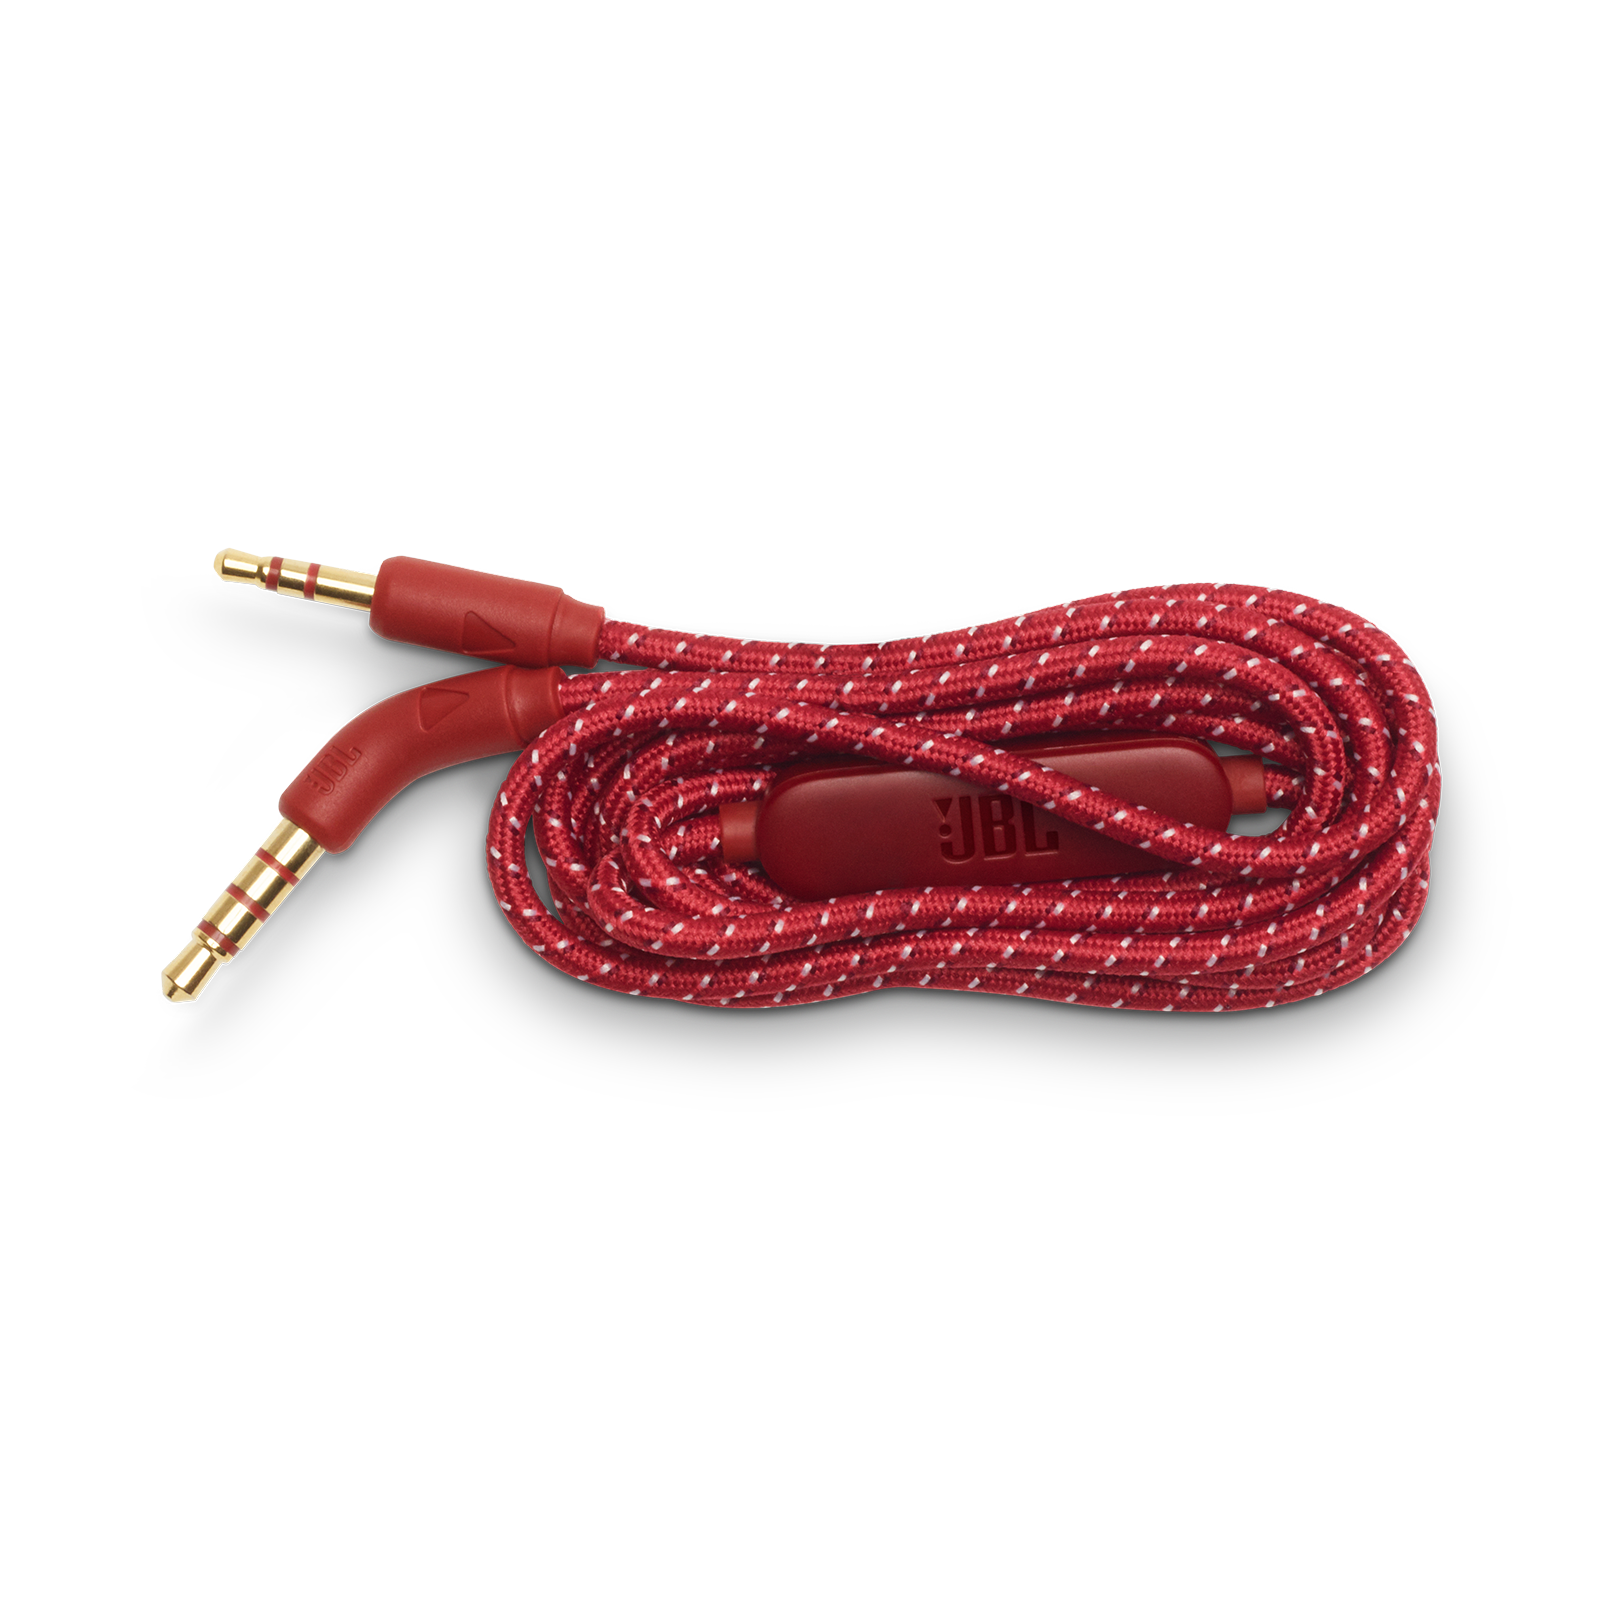 JBL Audio cable for Live 400/500BT - Red - Audio cable - Hero